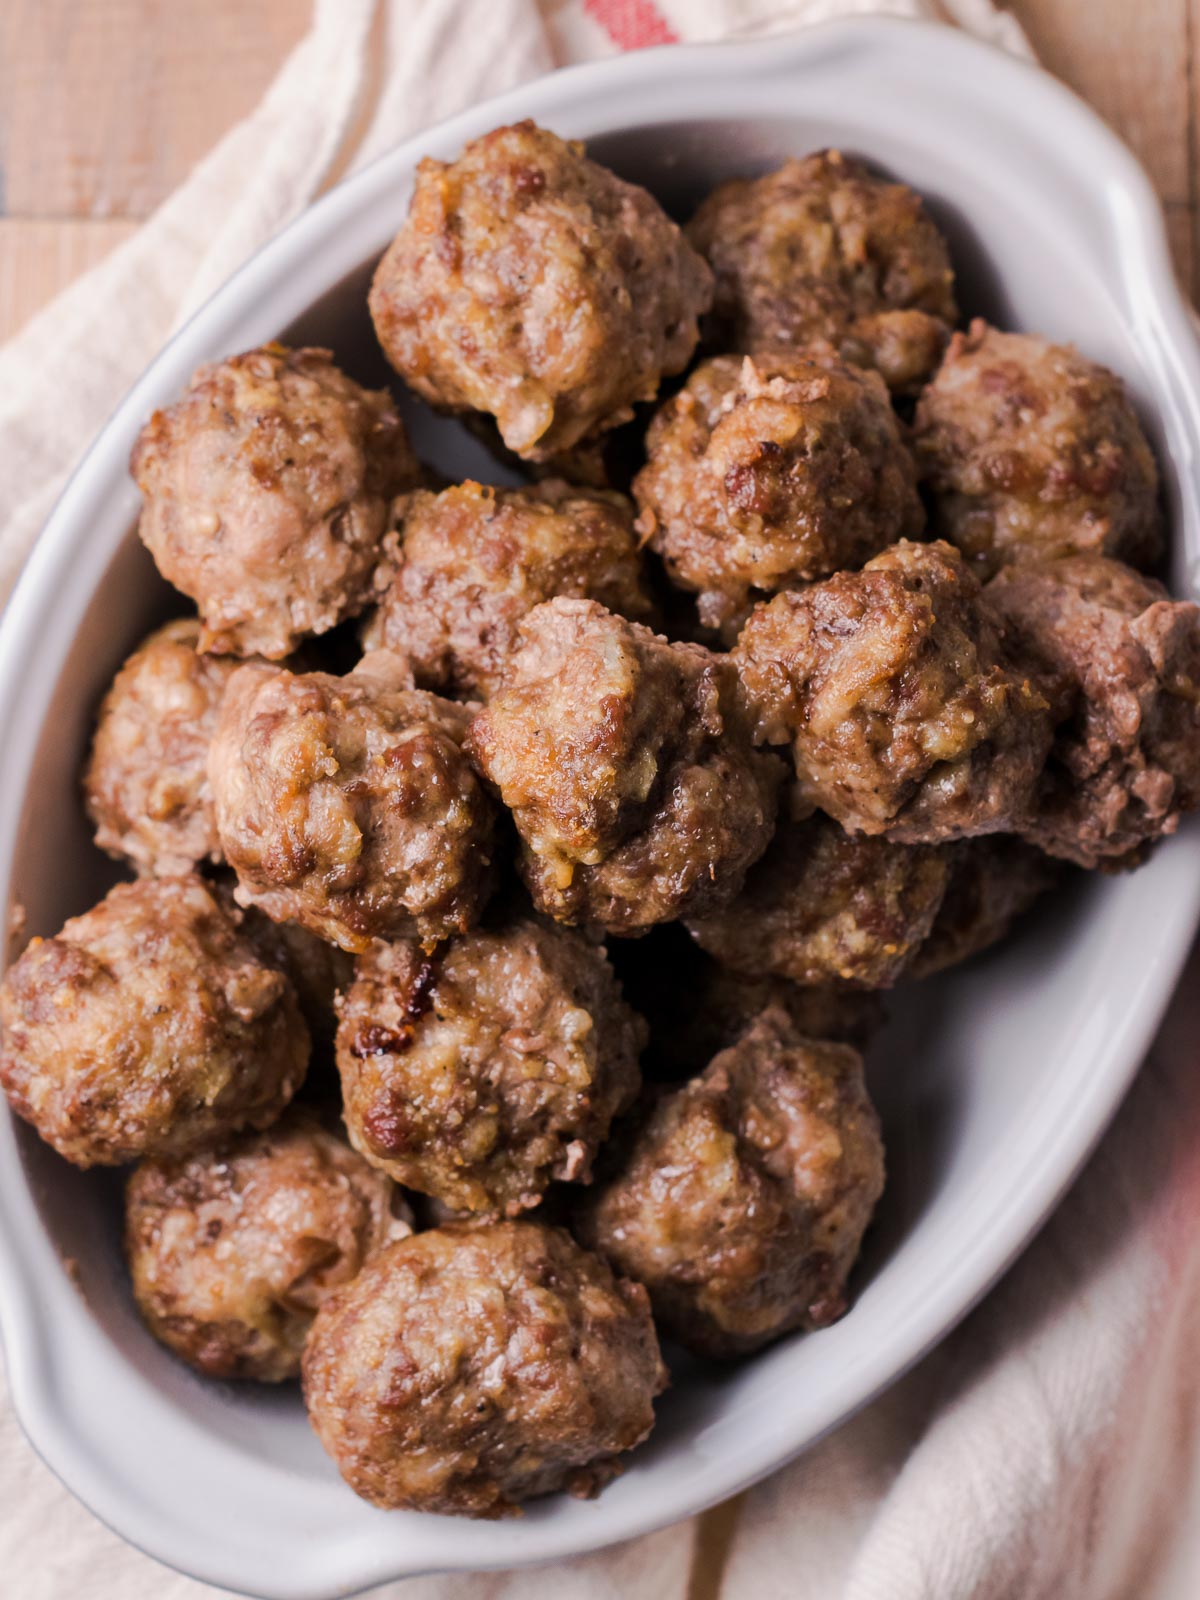 A bowl of cooked Gluten Free Meatballs.